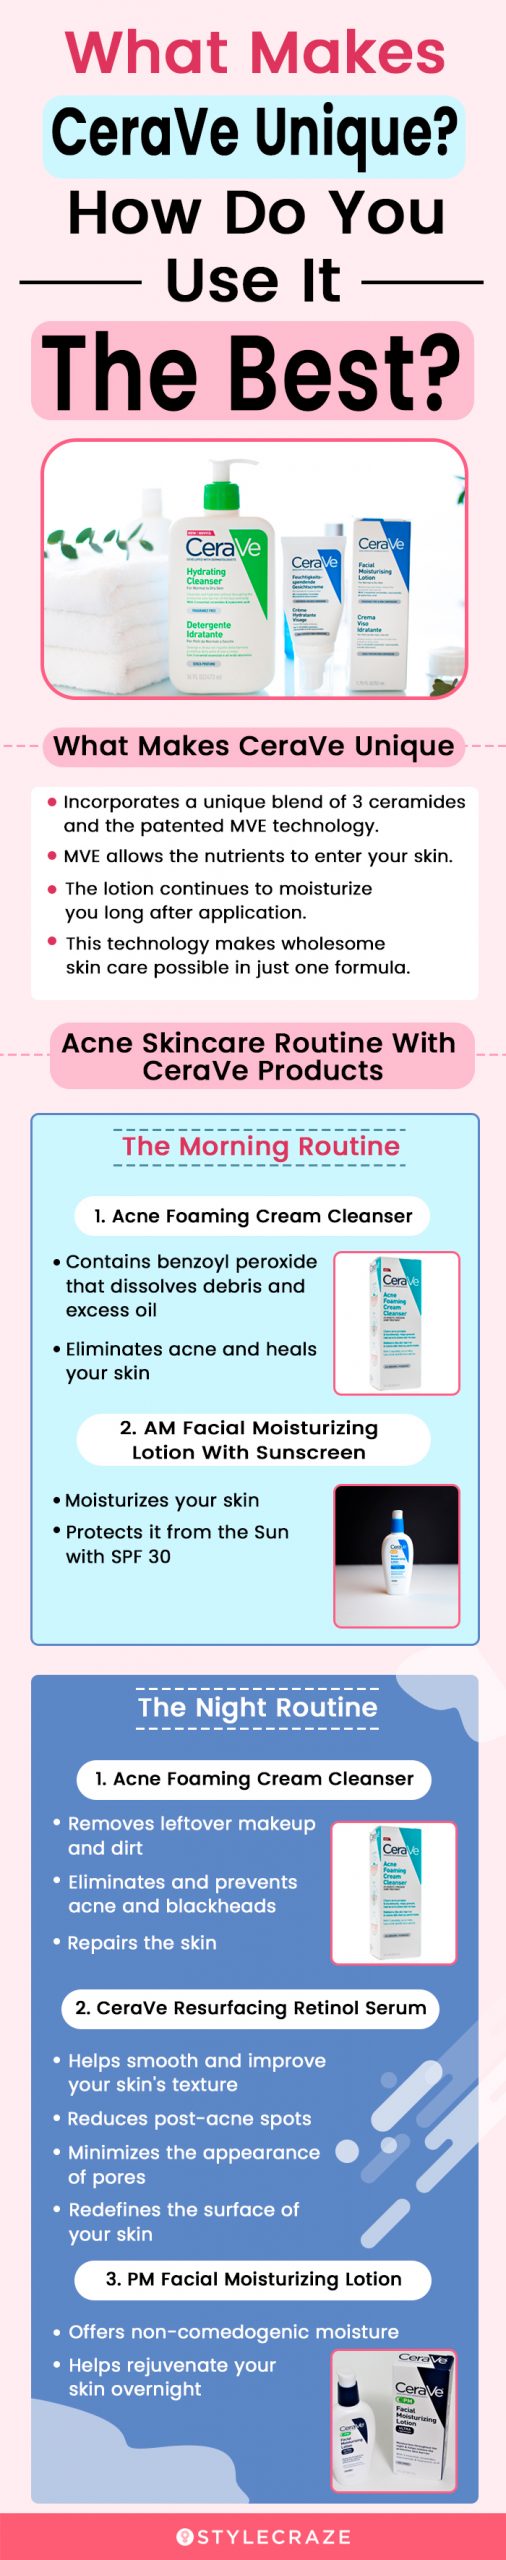 What Makes CeraVe Unique and How to Use It [infographic]